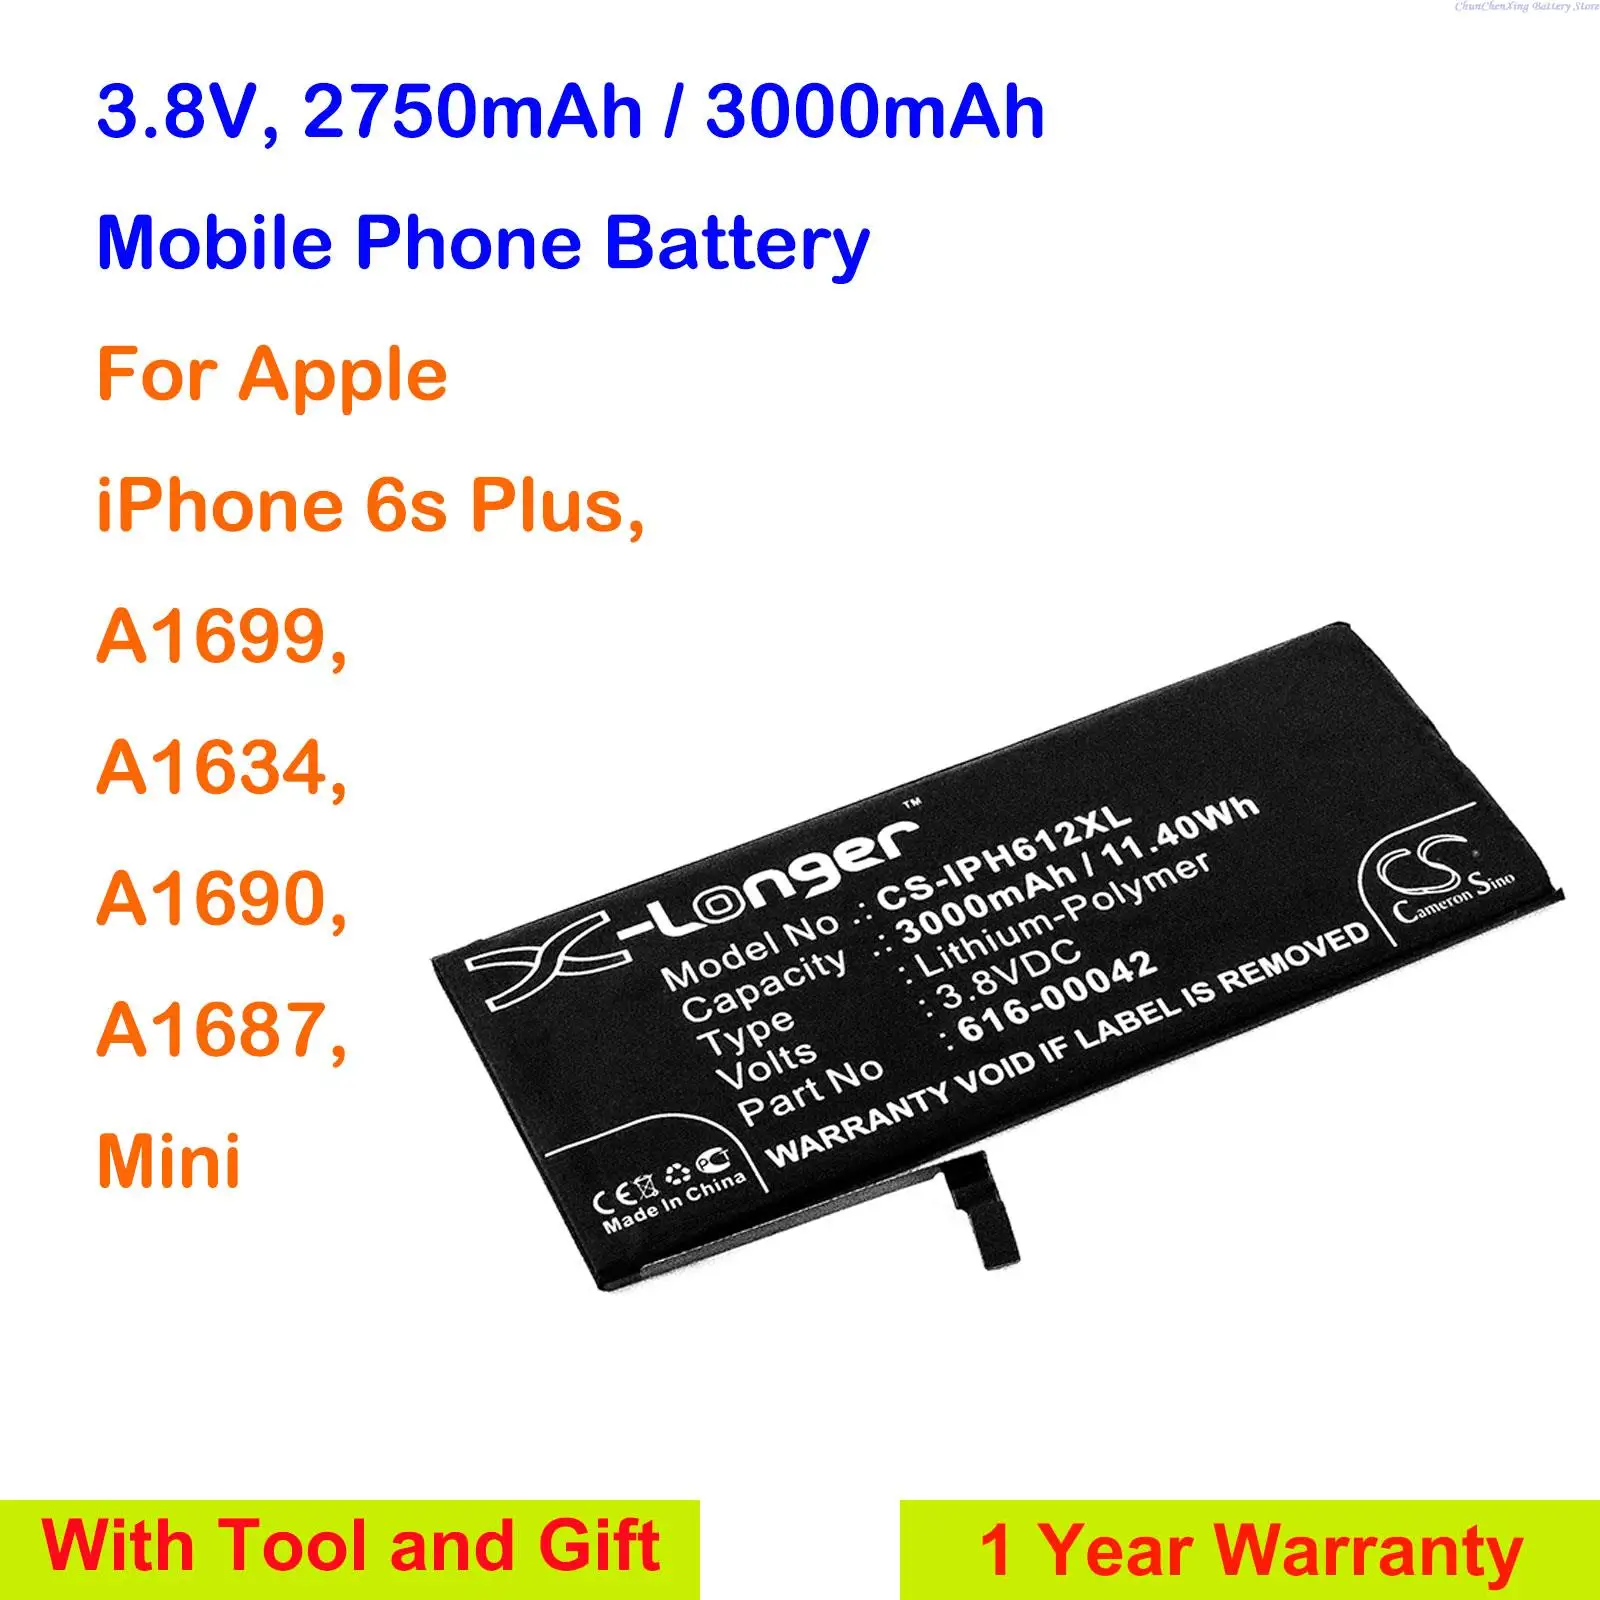 

GreenBattery 2750mAh/3000mAh Mobile Phone Battery 616-00042 for Apple A1634, A1687, A1690, A1699, iPhone 6s Plus